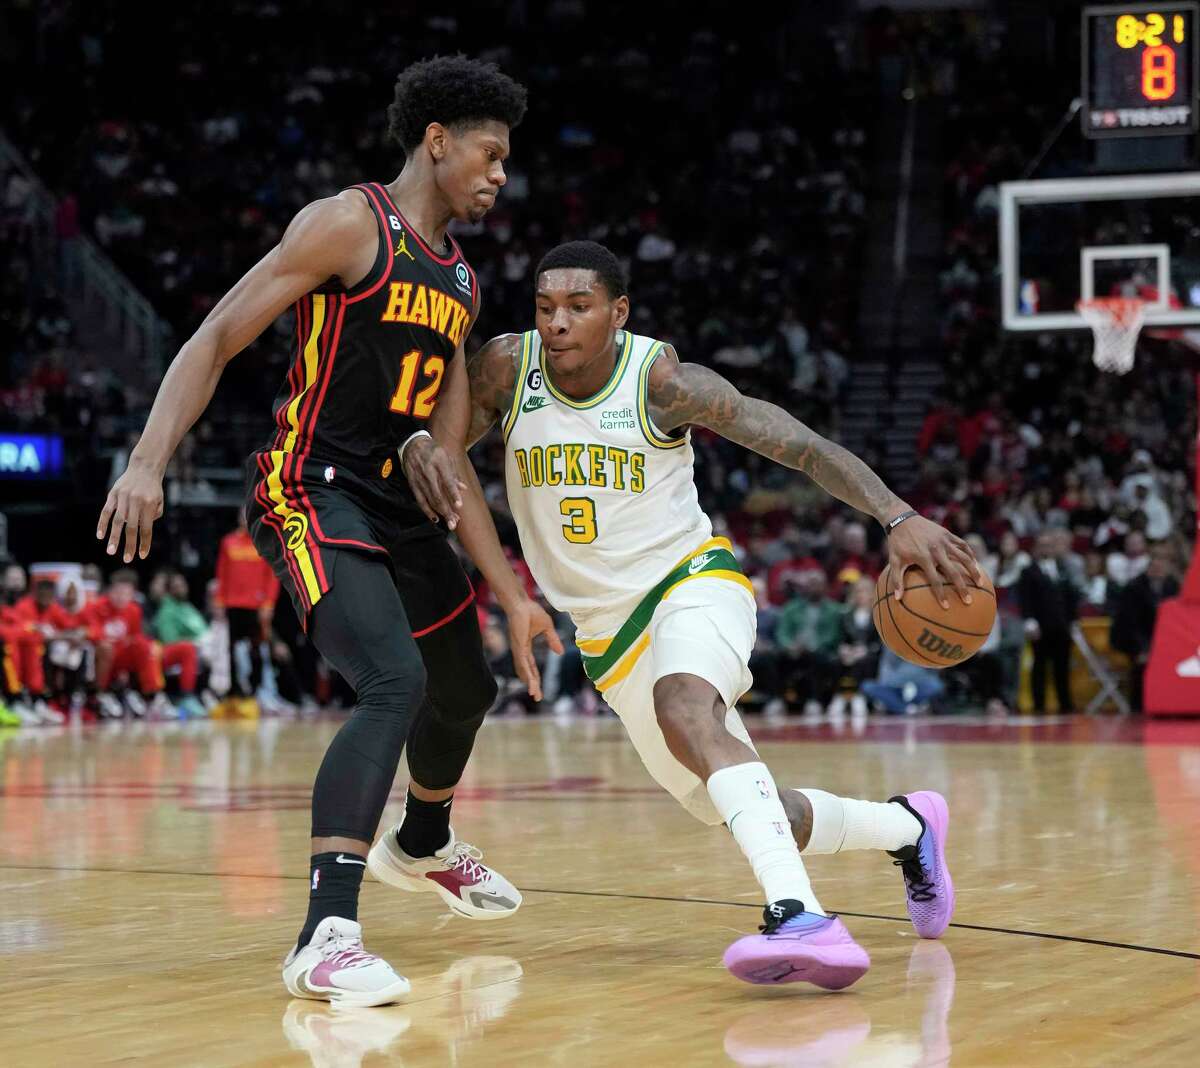 Houston Rockets guard Kevin Porter Jr. (3) drives against Atlanta Hawks forward De'Andre Hunter (12) during the first half of an NBA basketball game at Toyota Center on Friday, Nov. 25, 2022 in Houston .